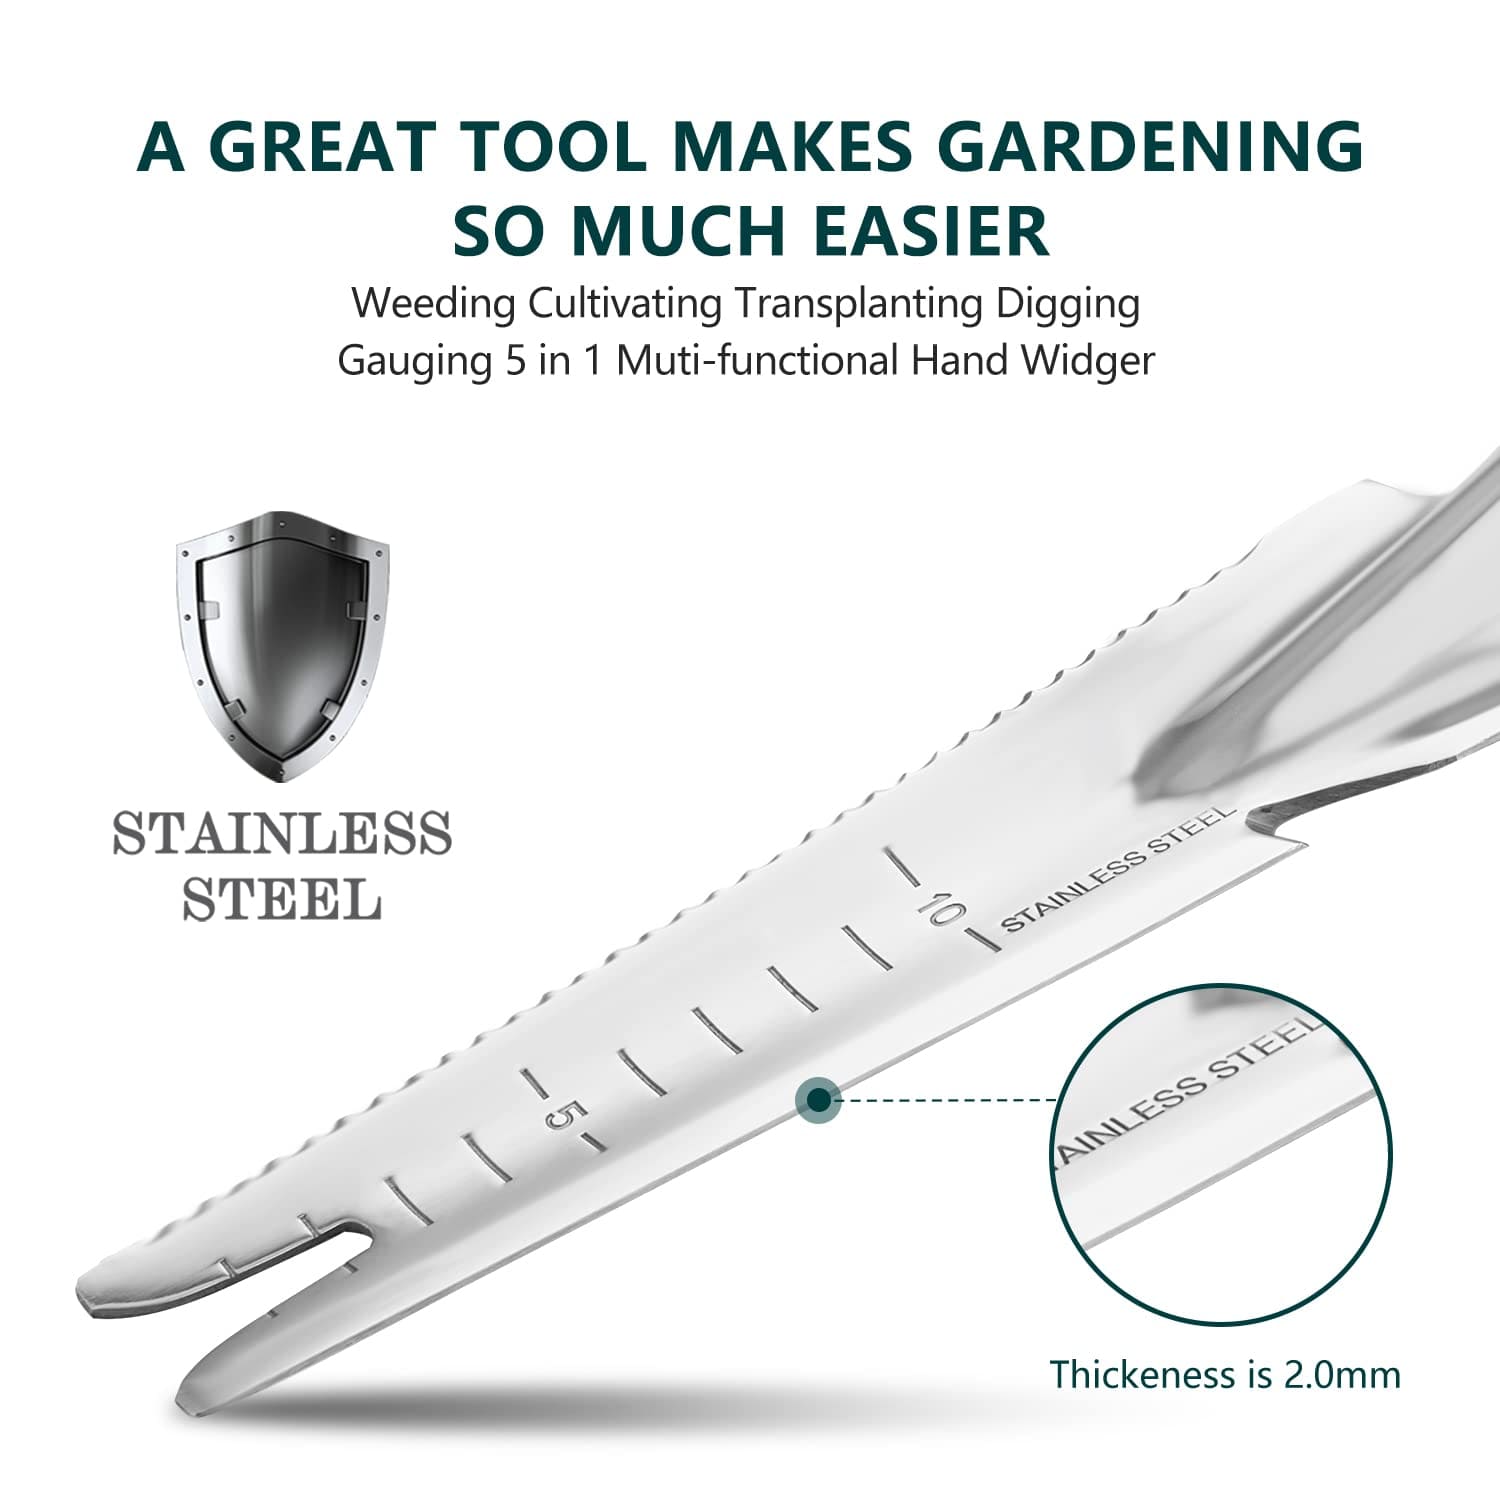 Our Top Weeding Tools for Less Effort and Better Results – Sow